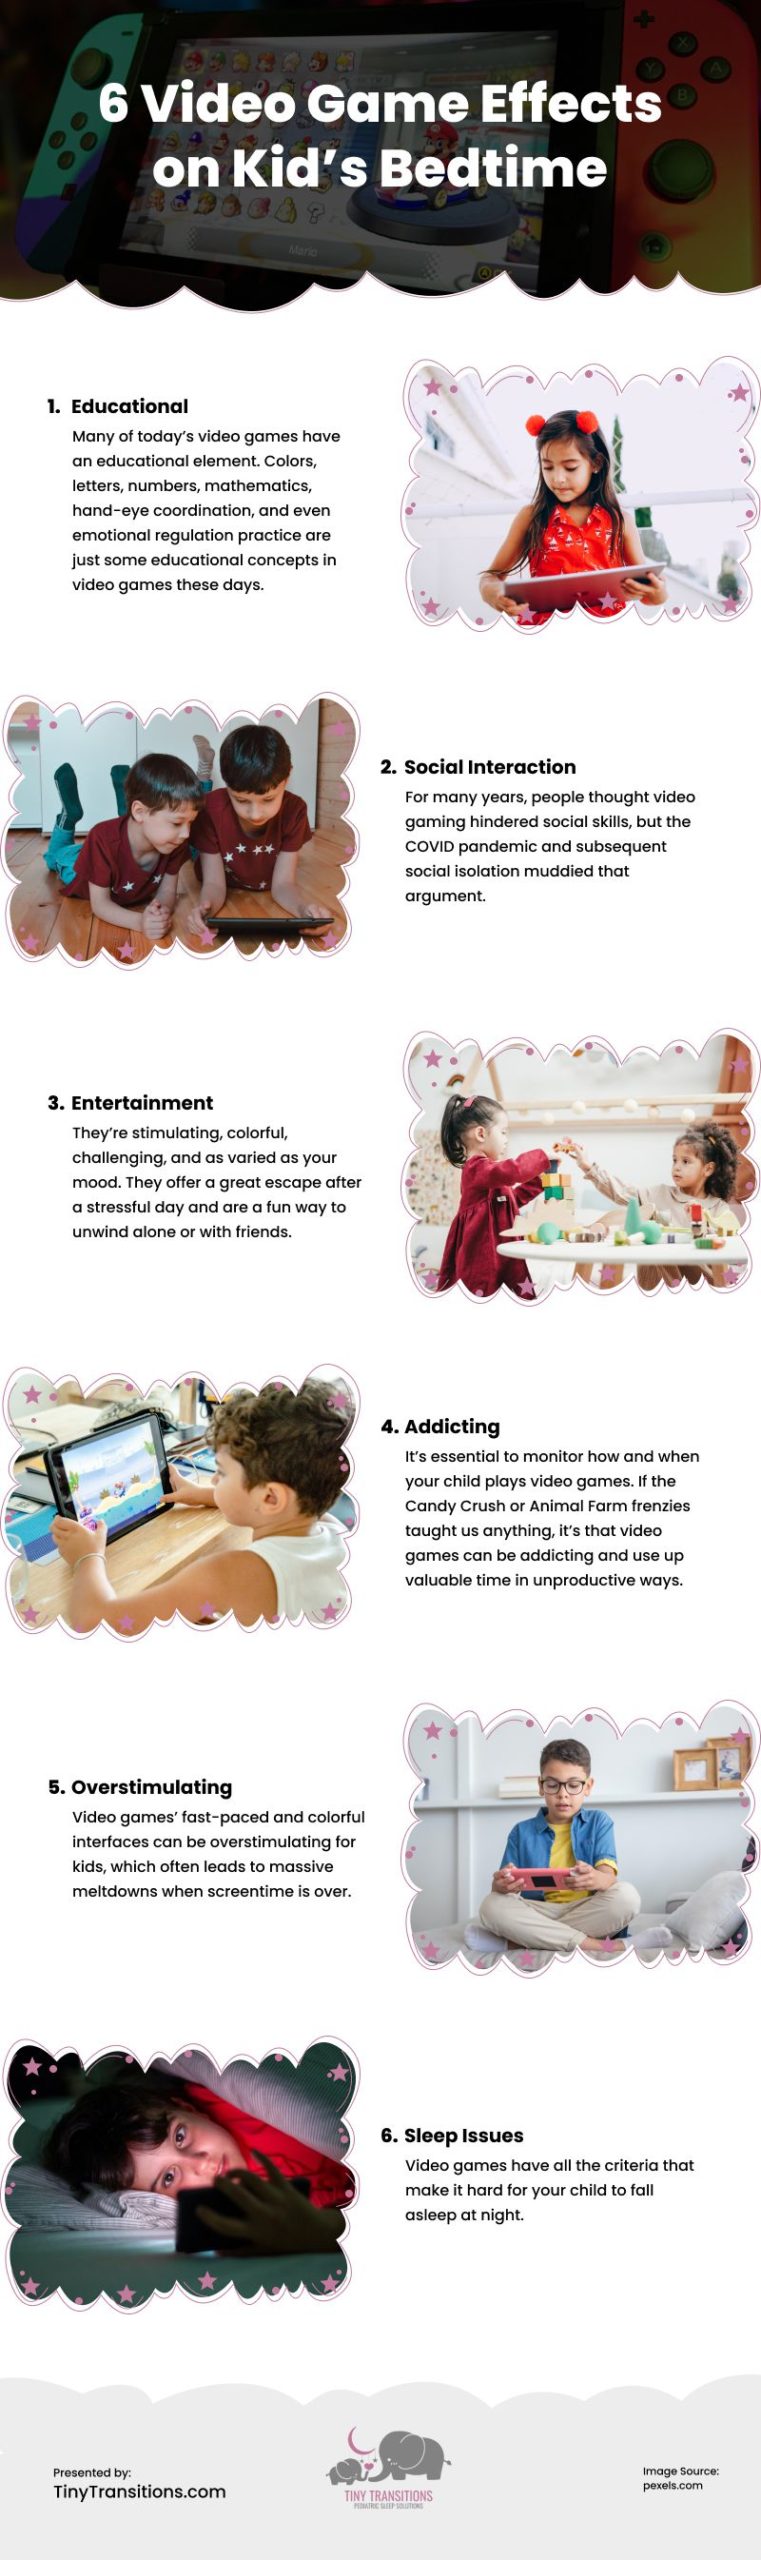 6 Video Game Effects on Kid's Bedtime Infographic